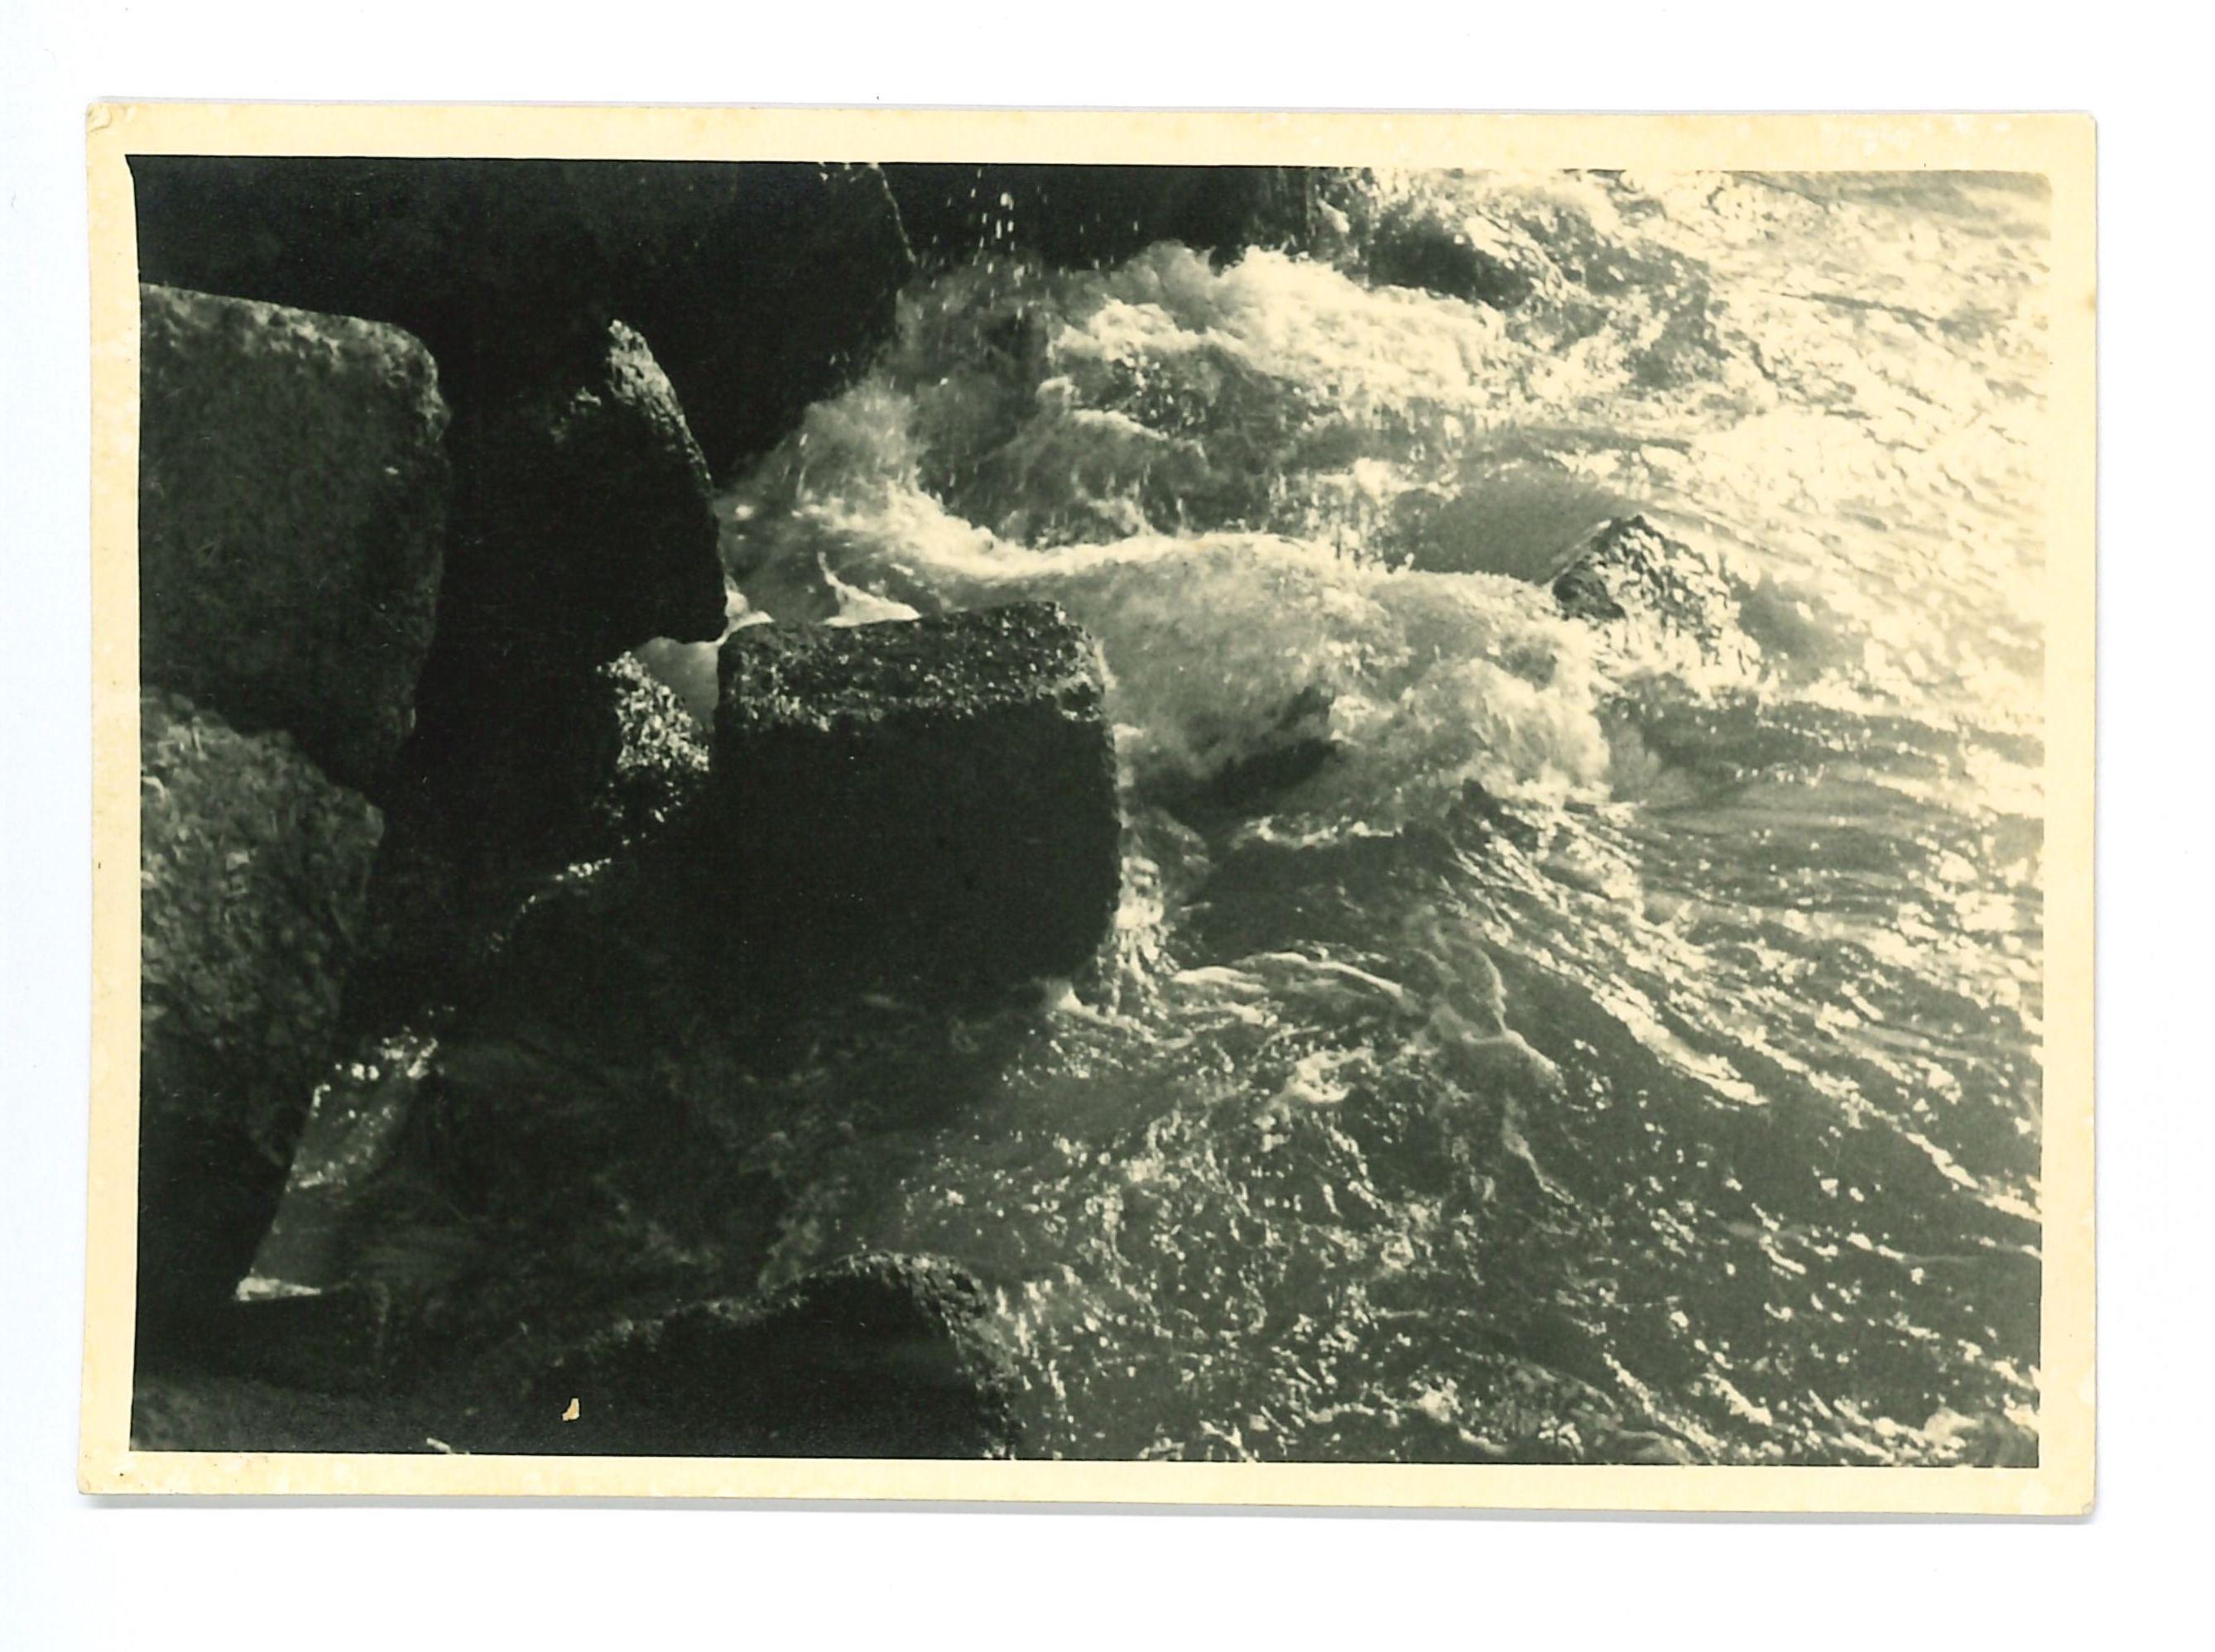 Unknown Landscape Photograph - Old Days Photo - Waves - Vintage Photo - mid-20th Century